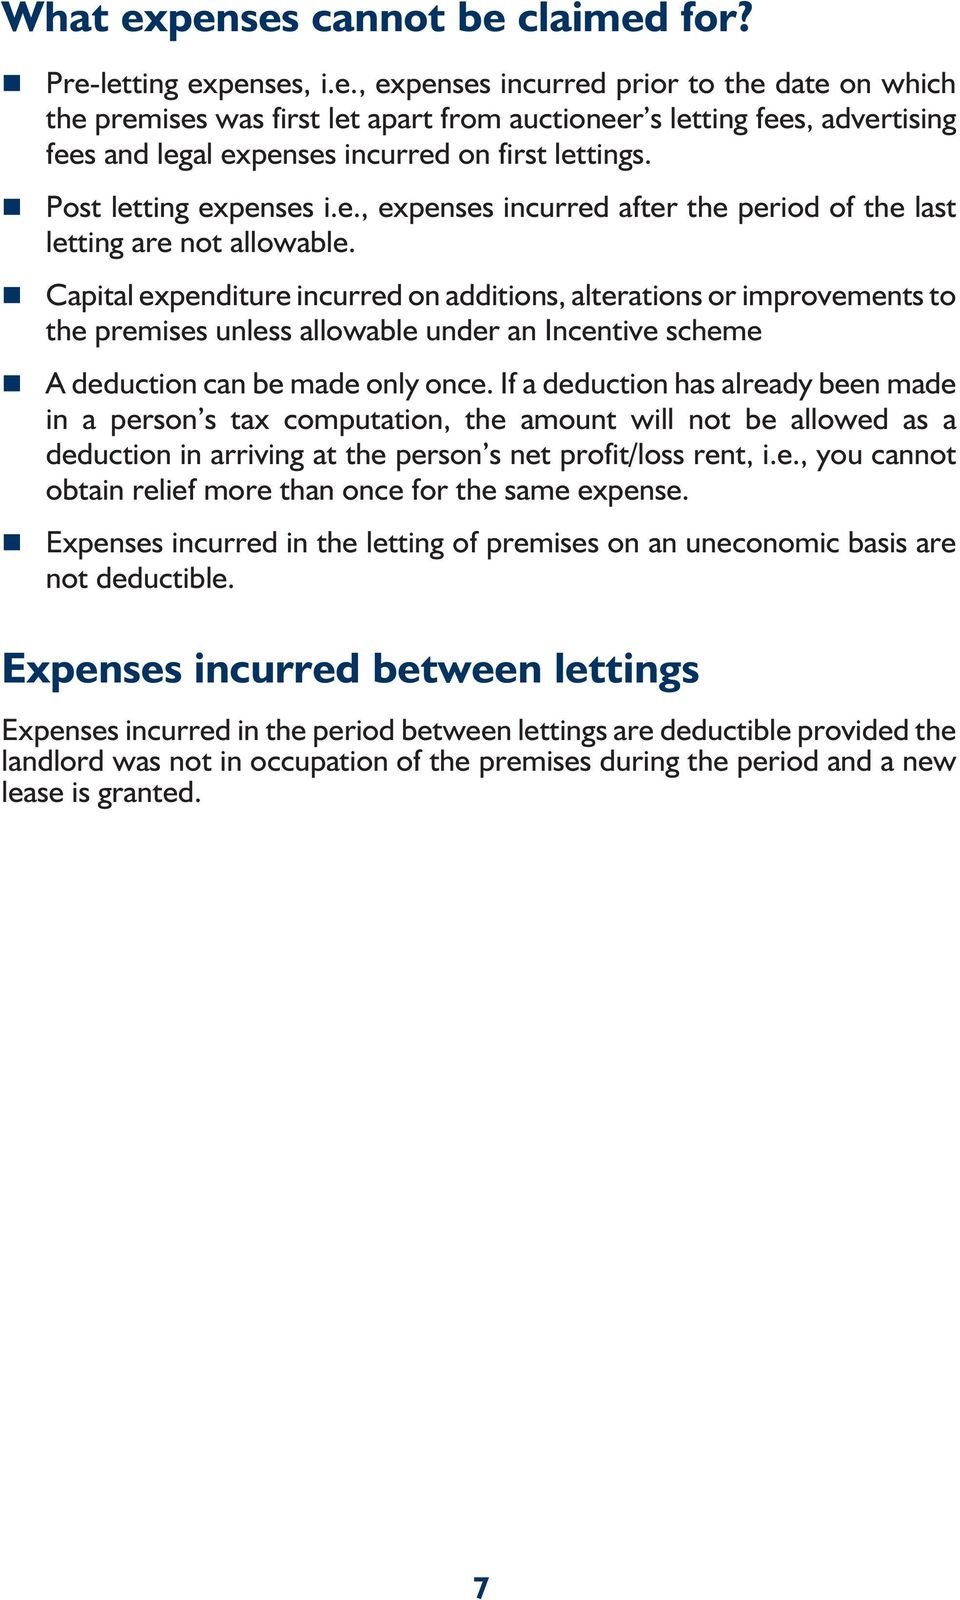 Capital expenditure incurred on additions, alterations or improvements to the premises unless allowable under an Incentive scheme A deduction can be made only once.